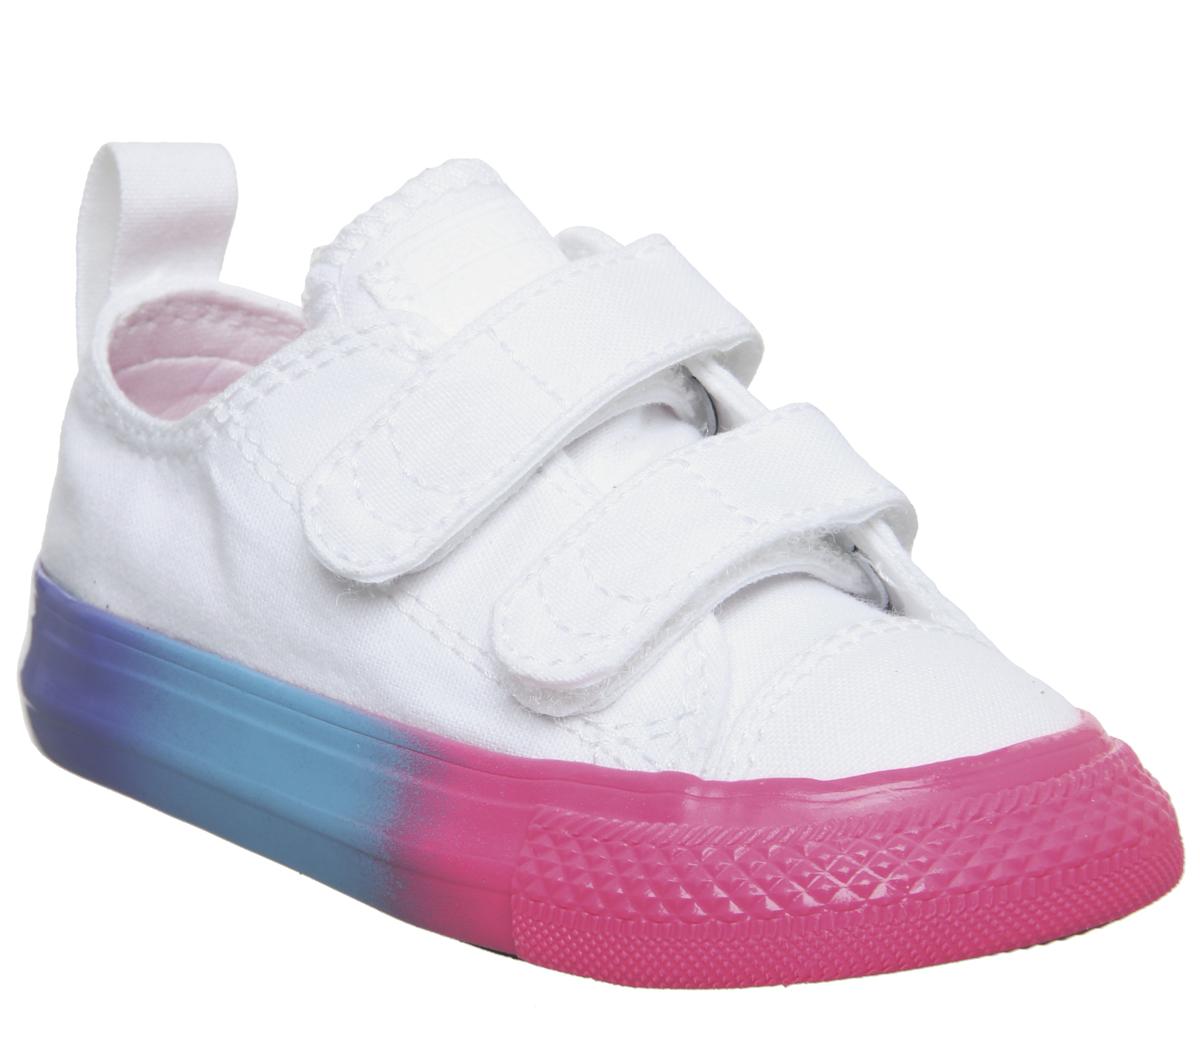 ConverseAll Star 2vlace TrainersWhite Racer Pink Black